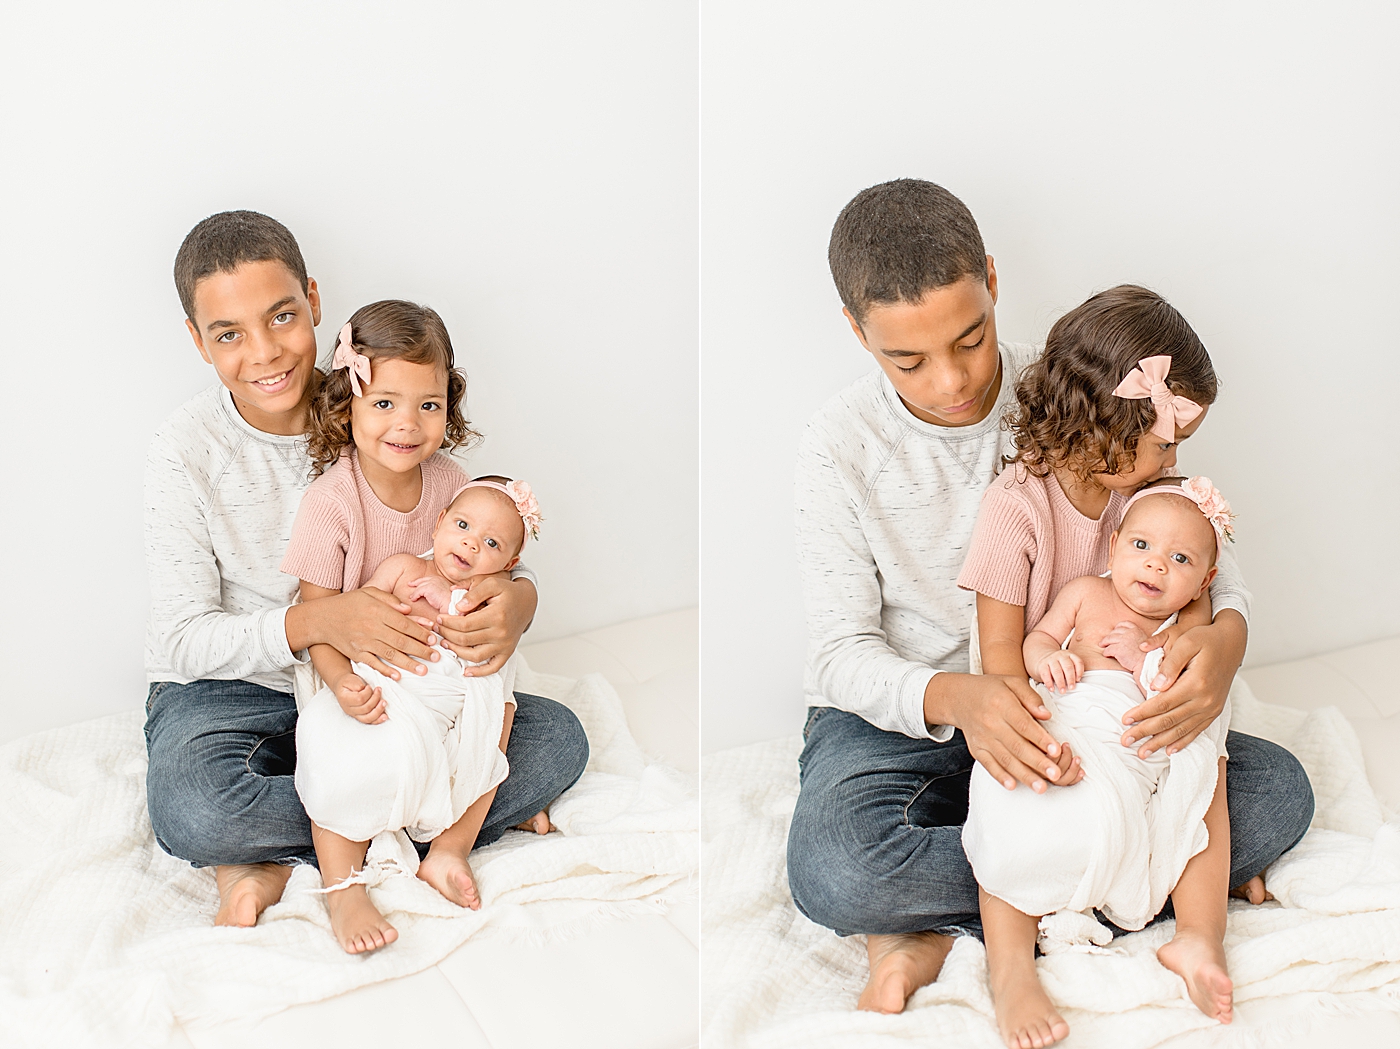 Big brother and big sister with their new baby sister during newborn photos. Photo by Brittany Elise Photography.